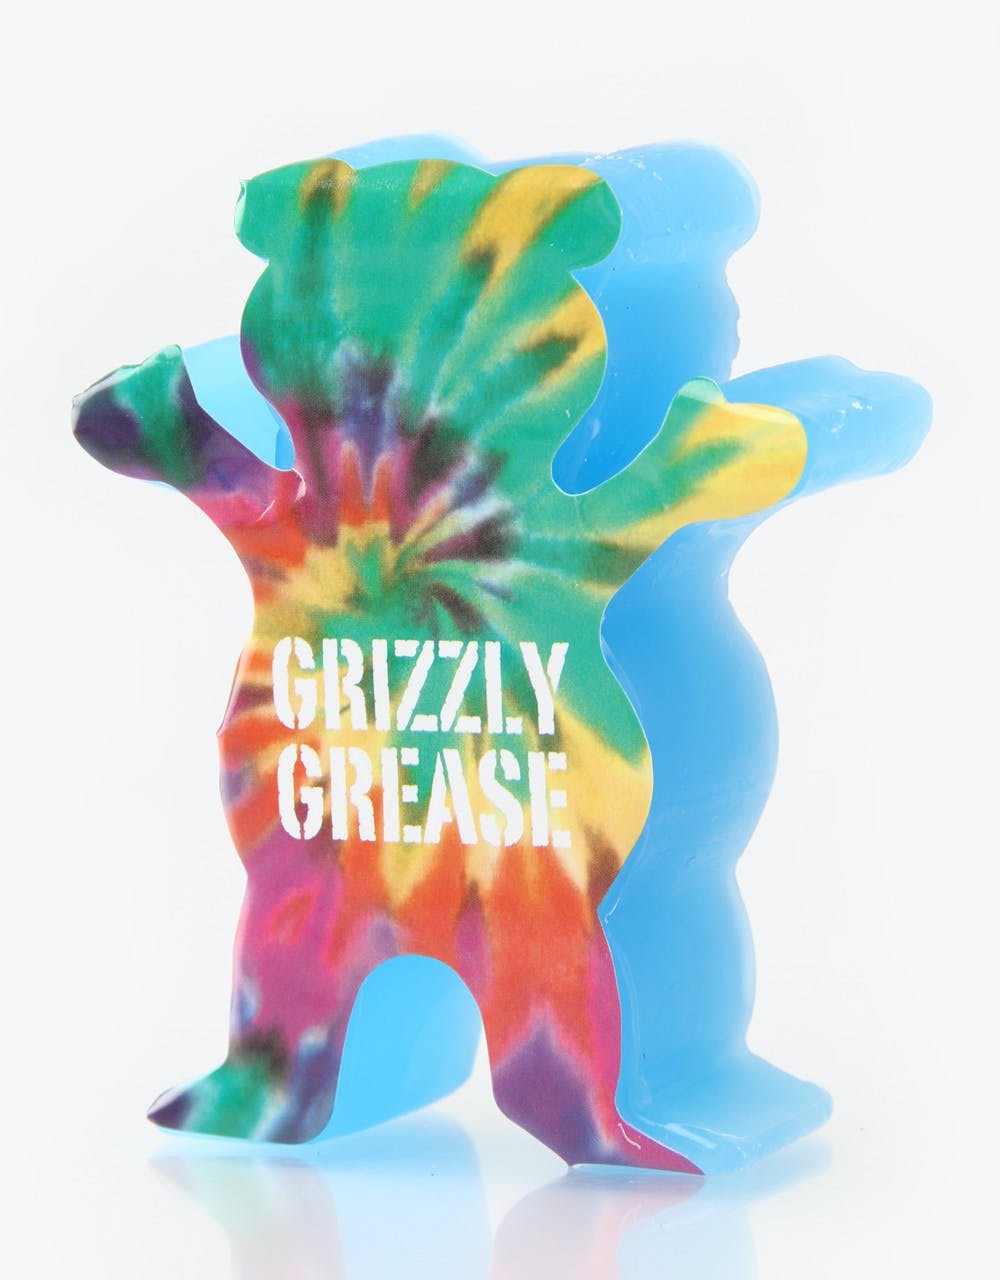 Grizzly Grease Wax